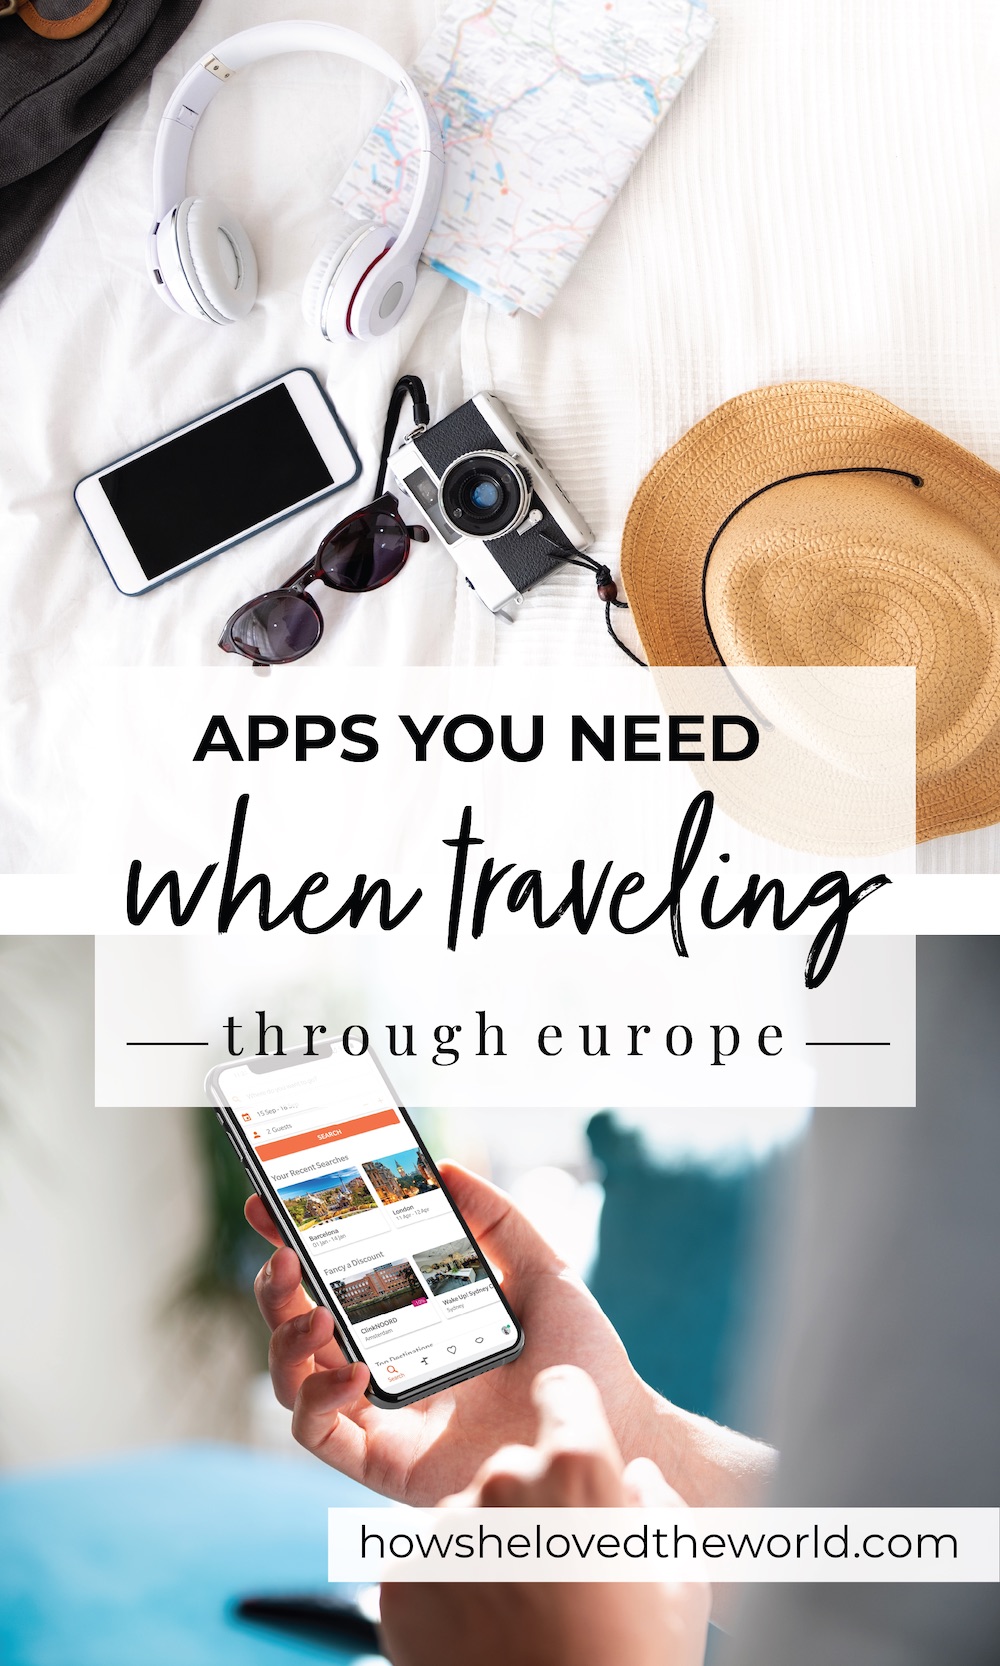 Best Travel Apps for Europe